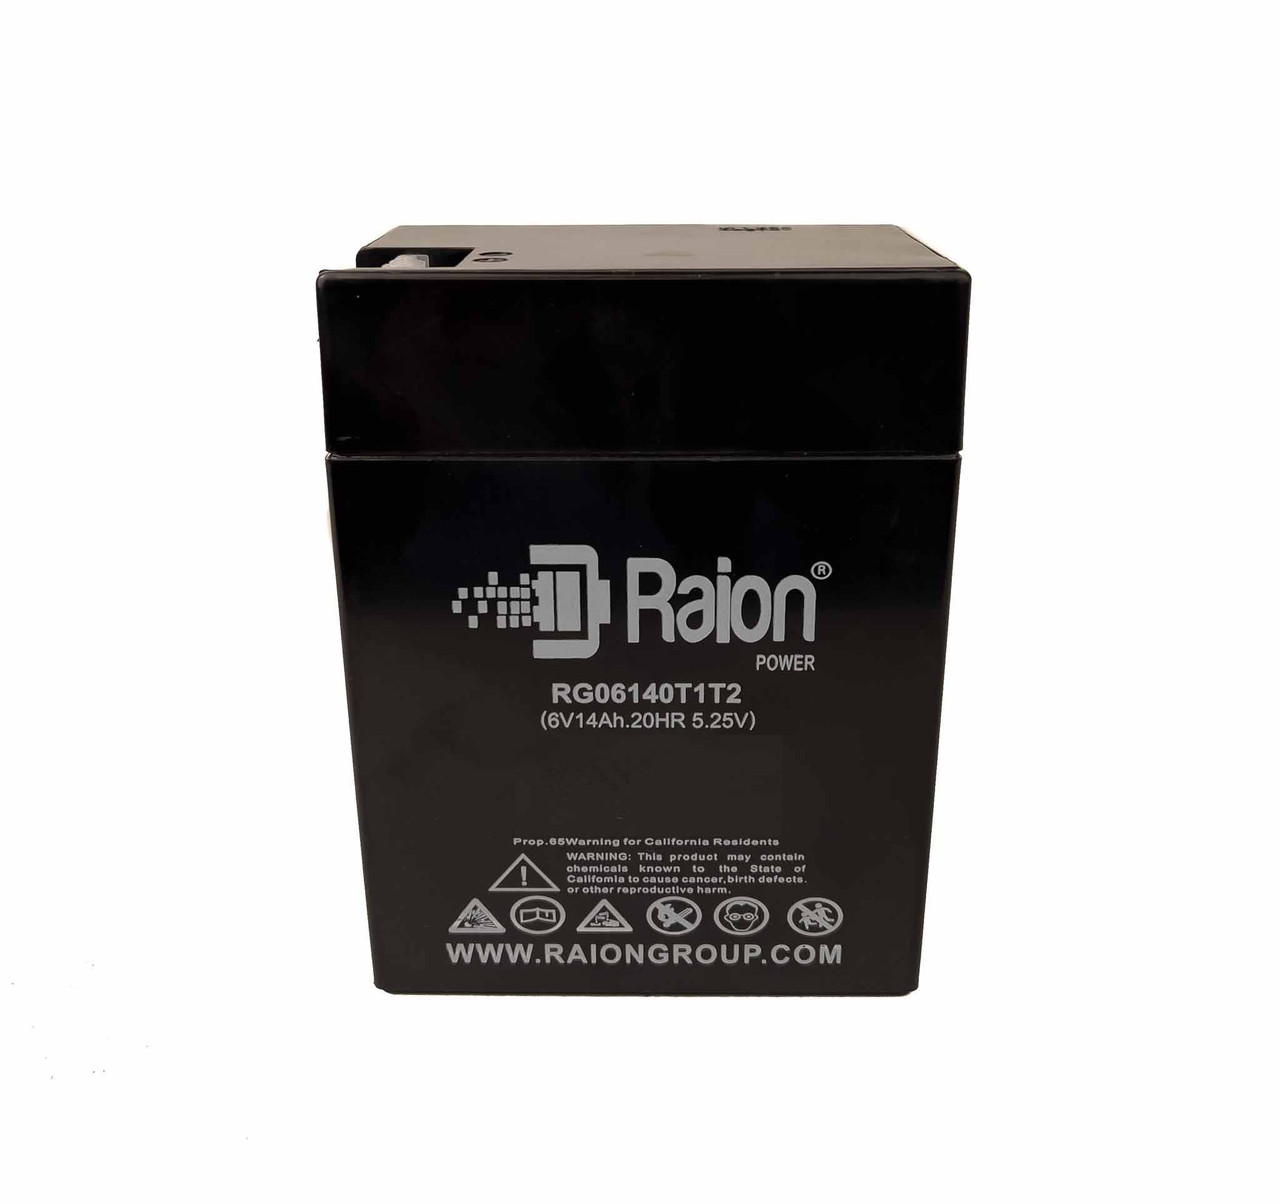 Raion Power RG06140T1T2 Replacement Battery for Parmak 901 Electric Fence Charger